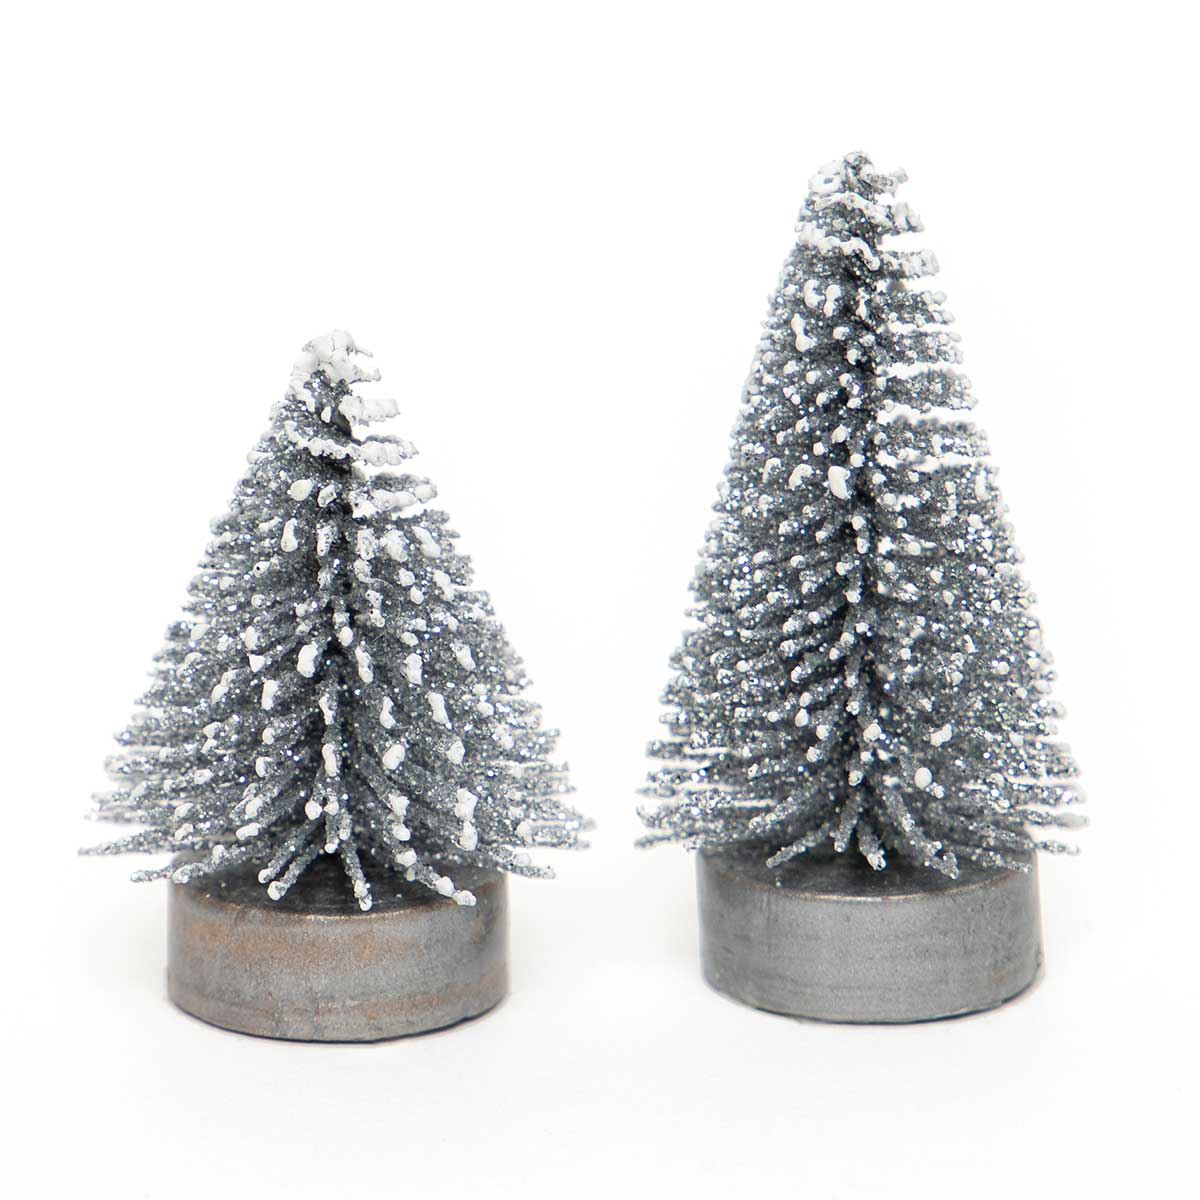 !MINI BRISTLE TREE SILVER WITH SNOWY TIPS, GLITTER AND WOOD BASE